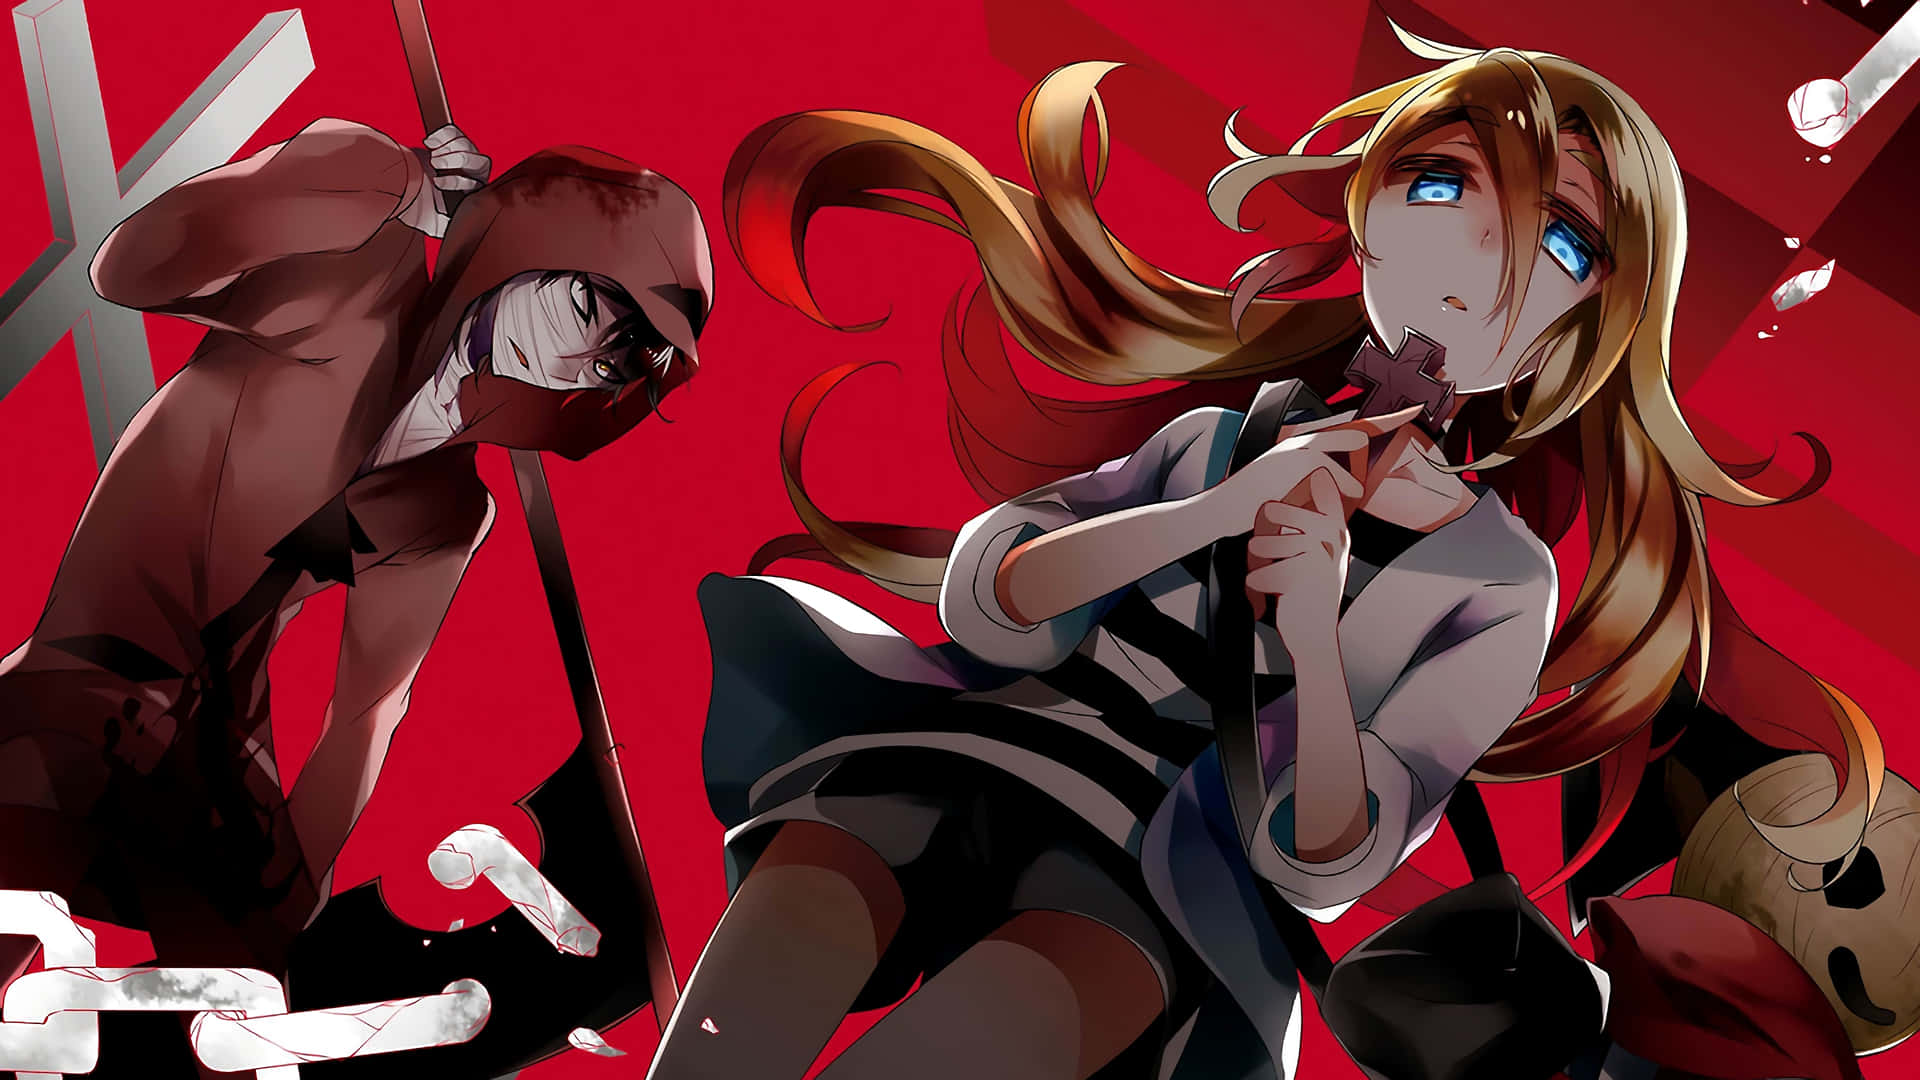 Download Anime fans rejoice - Angels Of Death is here!